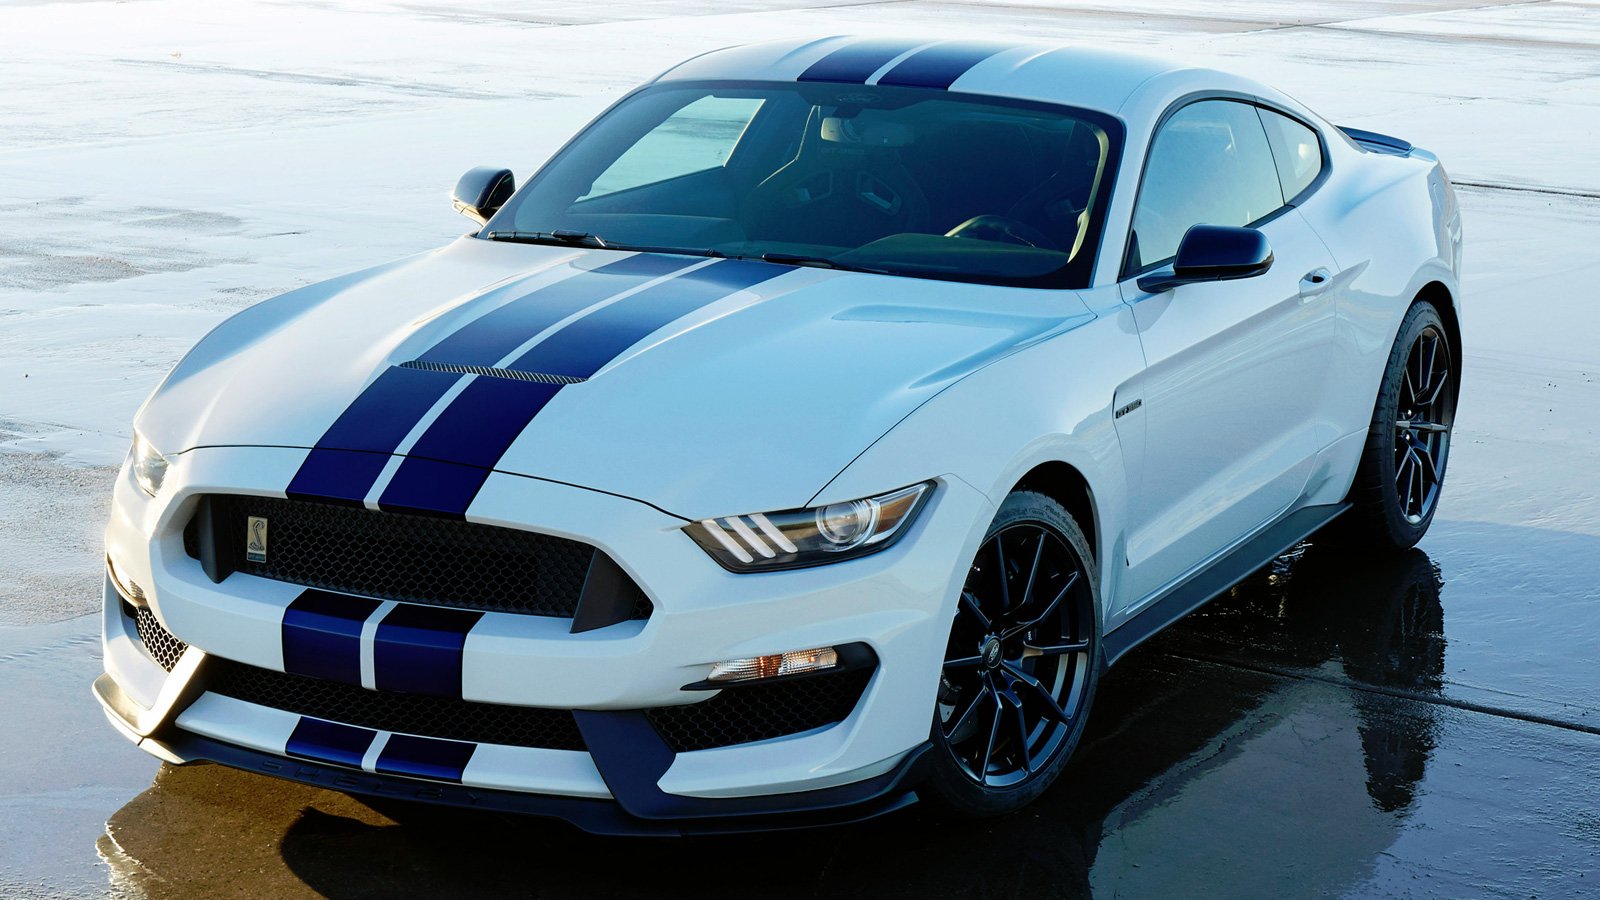 Форд мустанг джей ти. Форд Мустанг gt 350. Форд Мустанг Шелби 2015. Ford Mustang Shelby gt350. Ford Mustang Shelby gt350 2015.